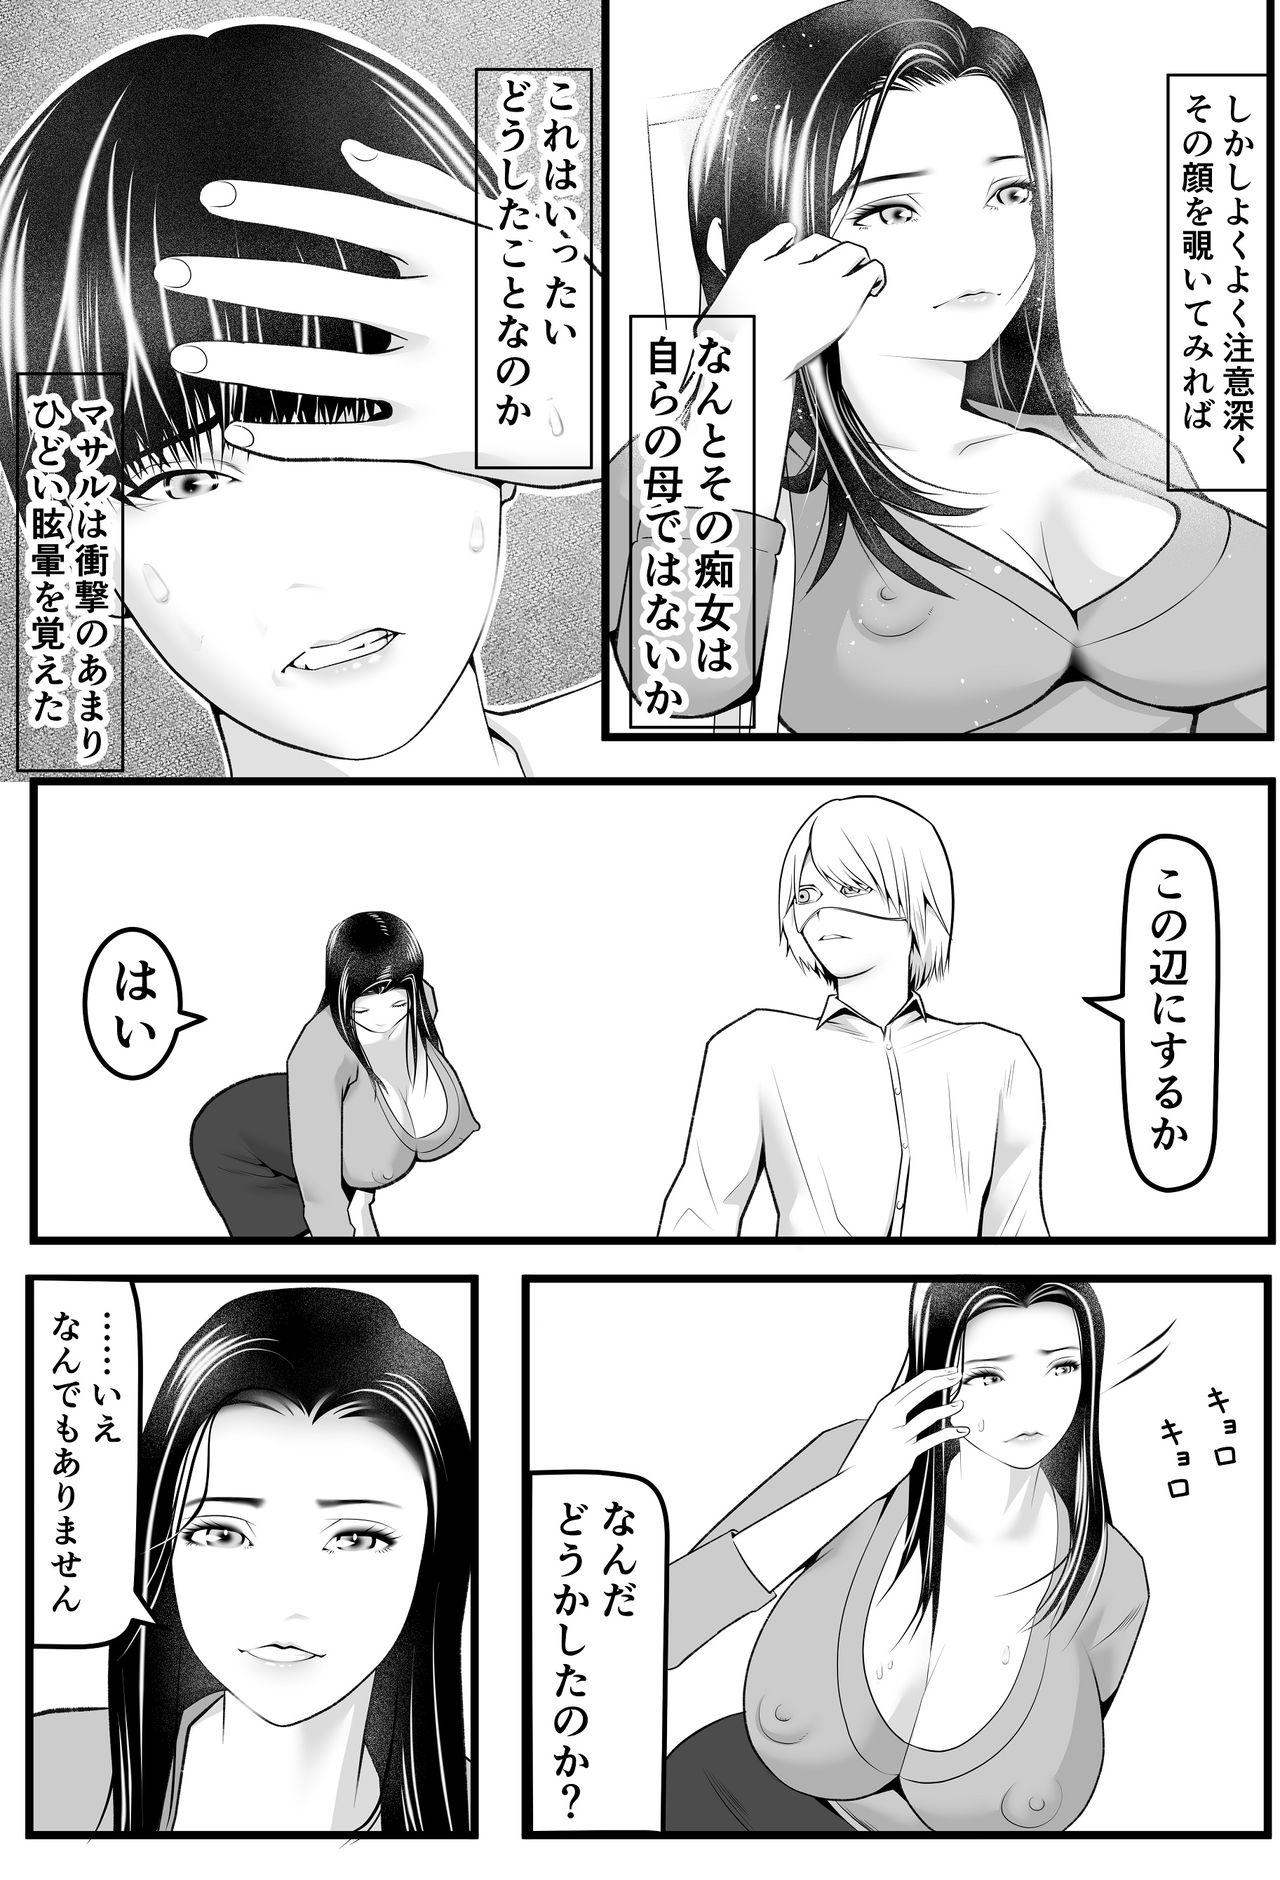 Young 新月館主人 - Original Massages - Page 7